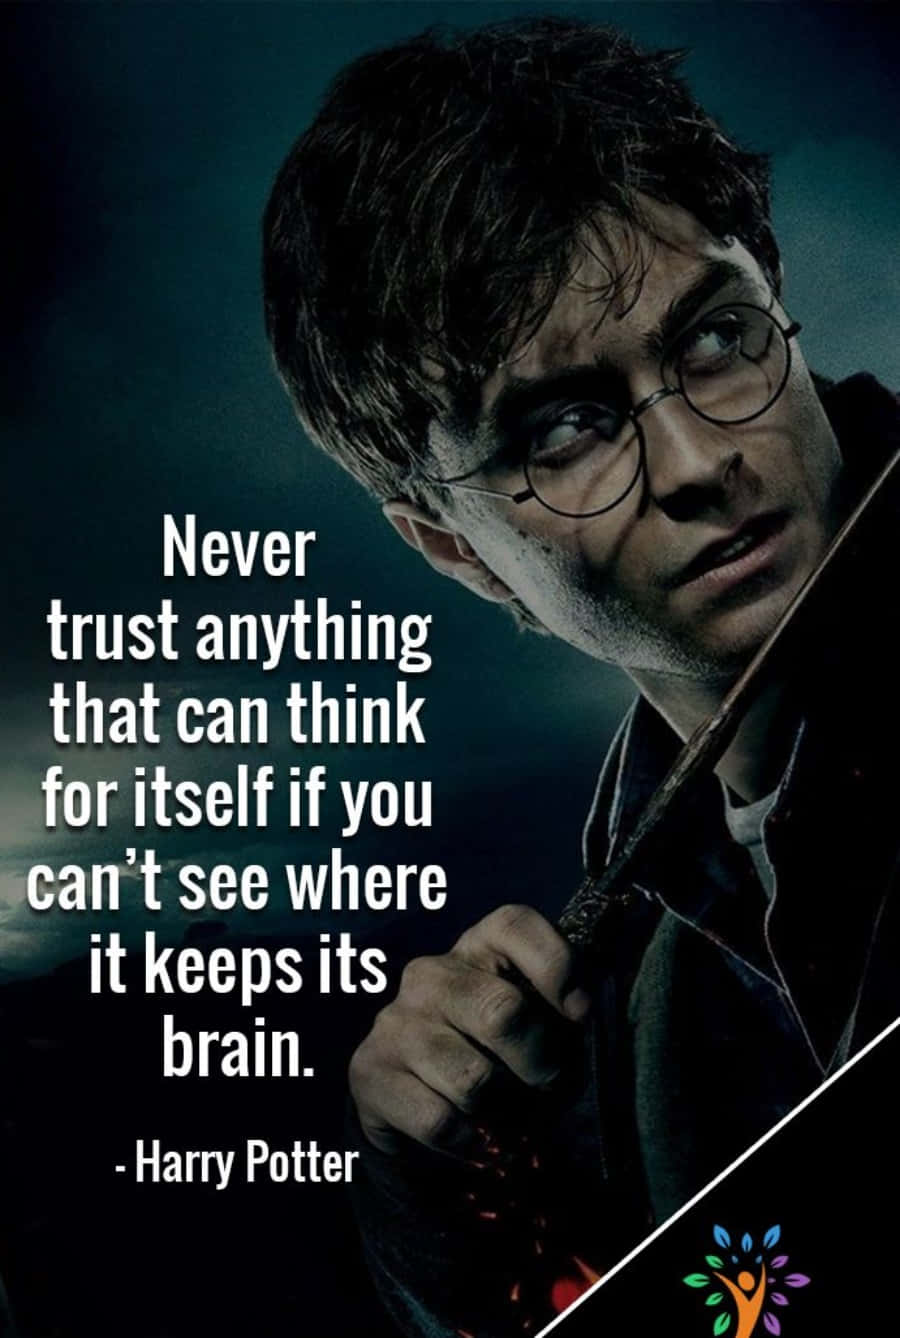 Inspirational Harry Potter Quote on a Wall Wallpaper